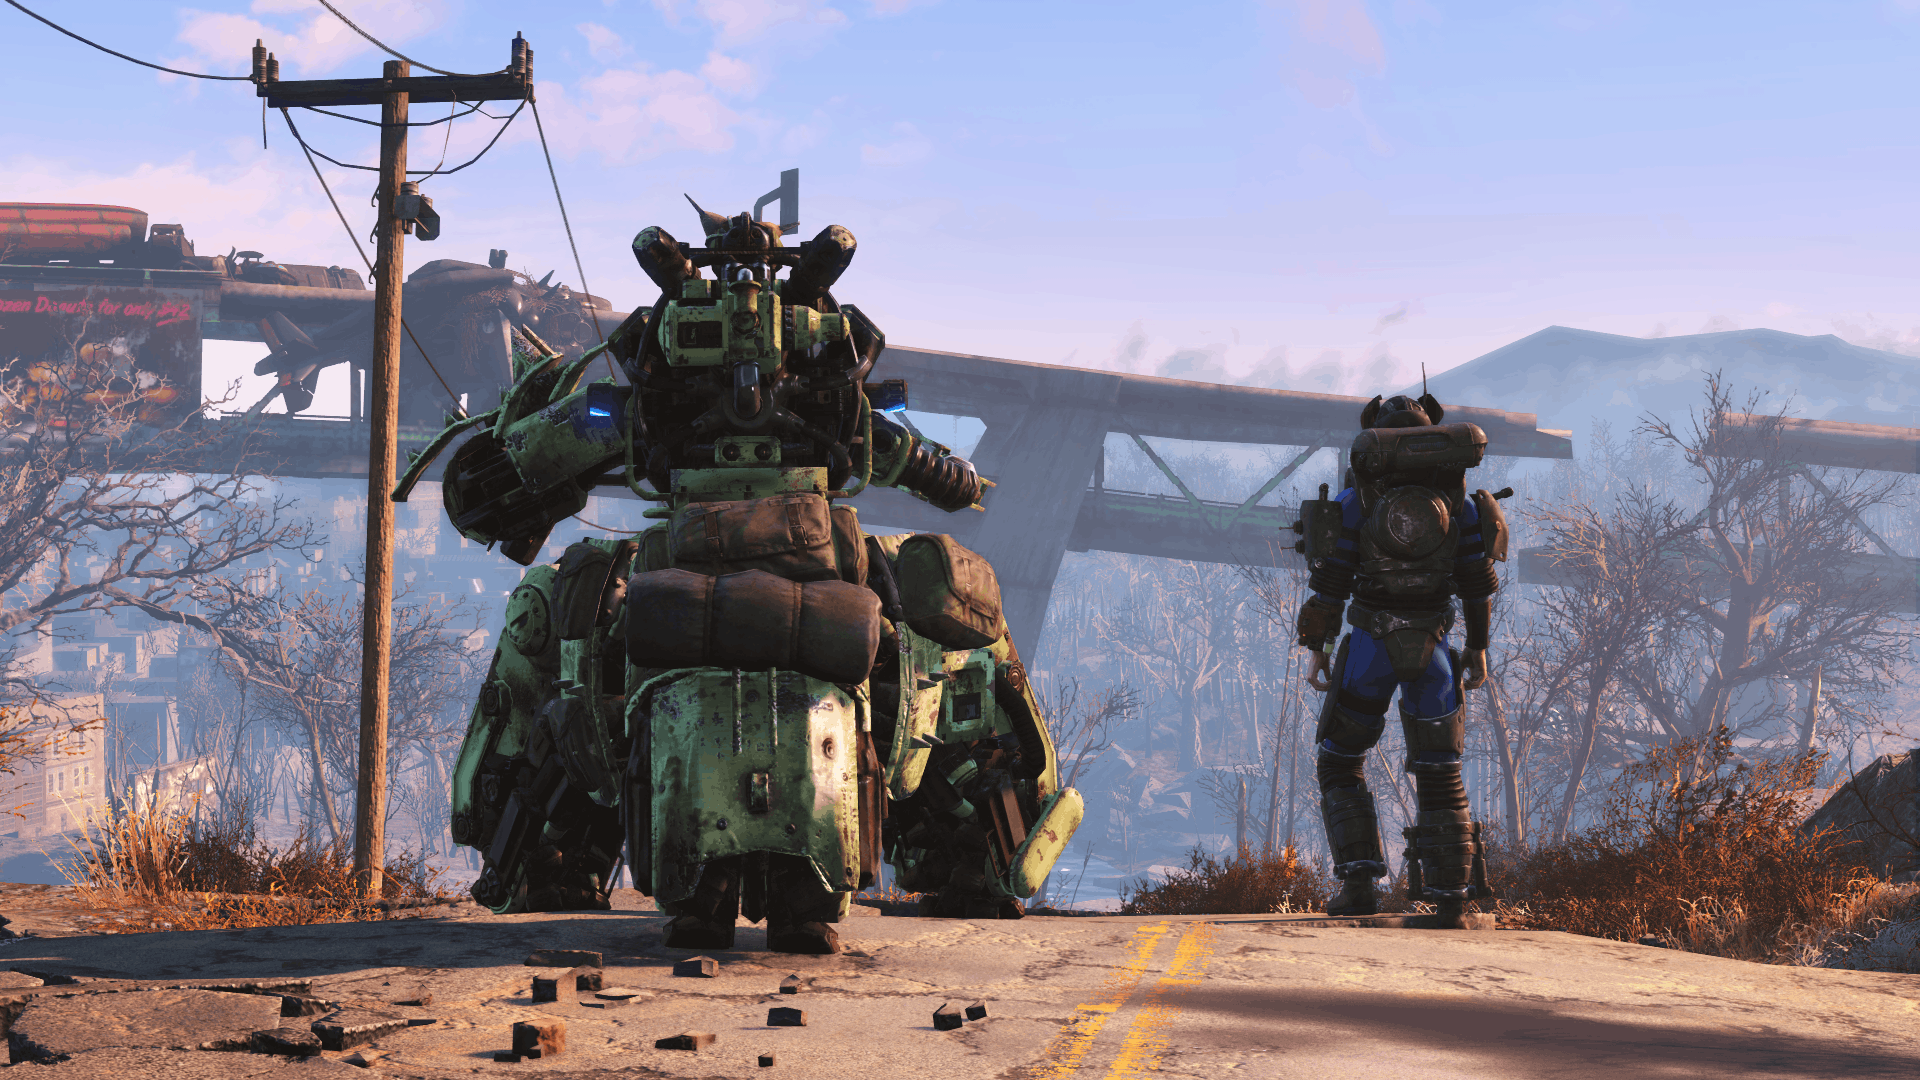 Everything You Need To Know About Fallout 4’s DLC, Which Starts In March